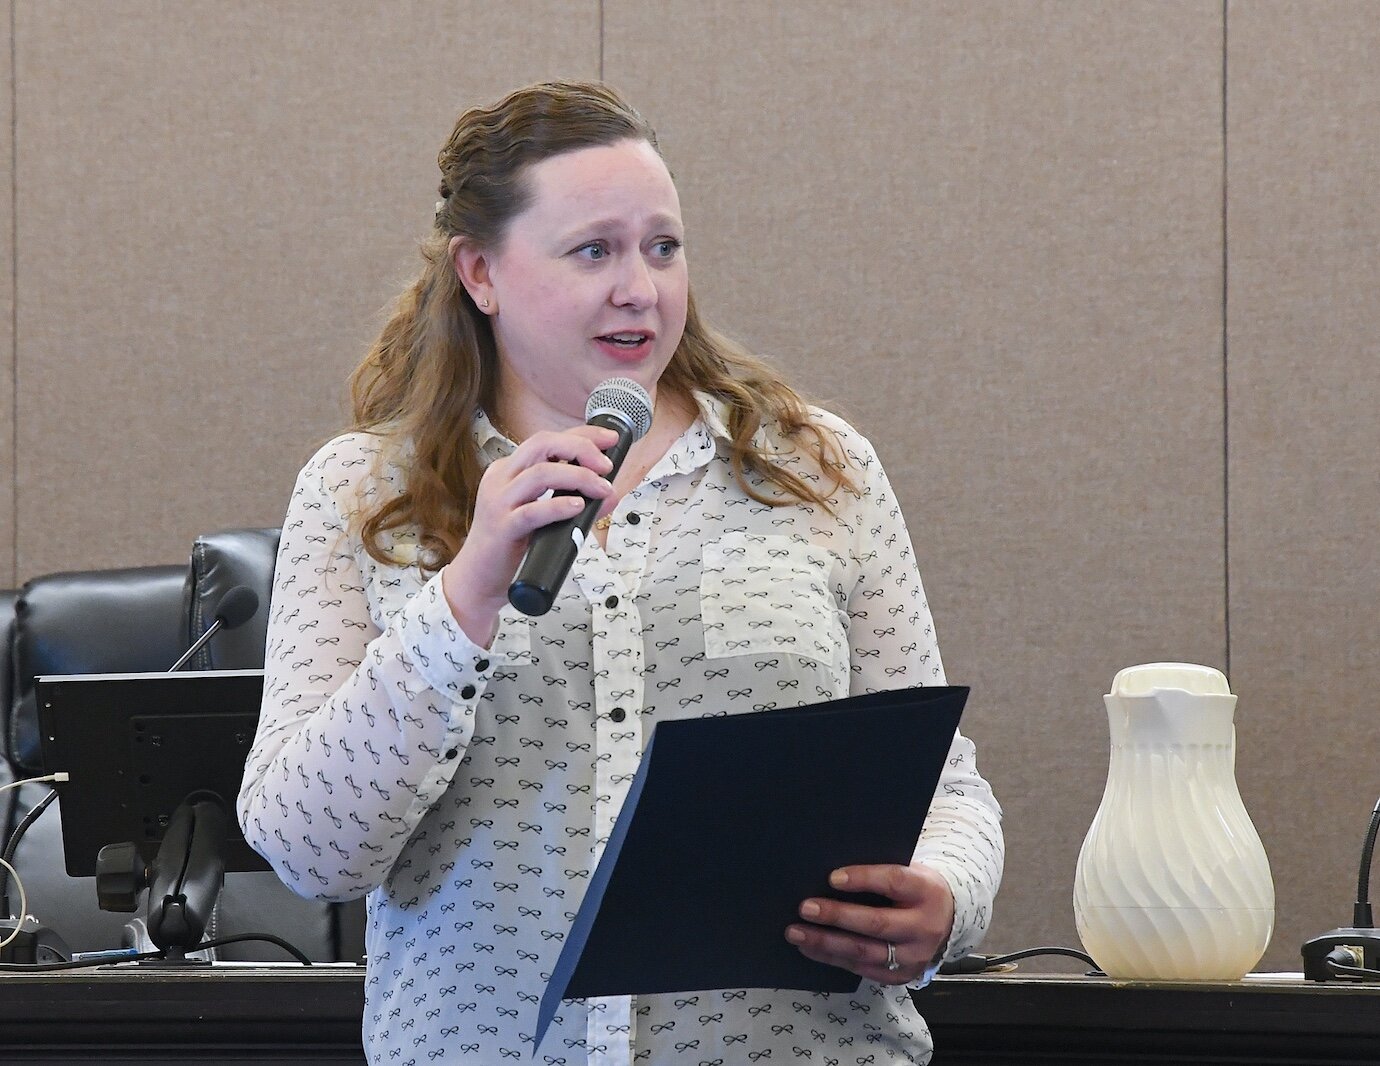 Kaytee Faris, Battle Creek City Commission member and Vice Mayor, talks prior to reading a proclamation at a recent meeting.